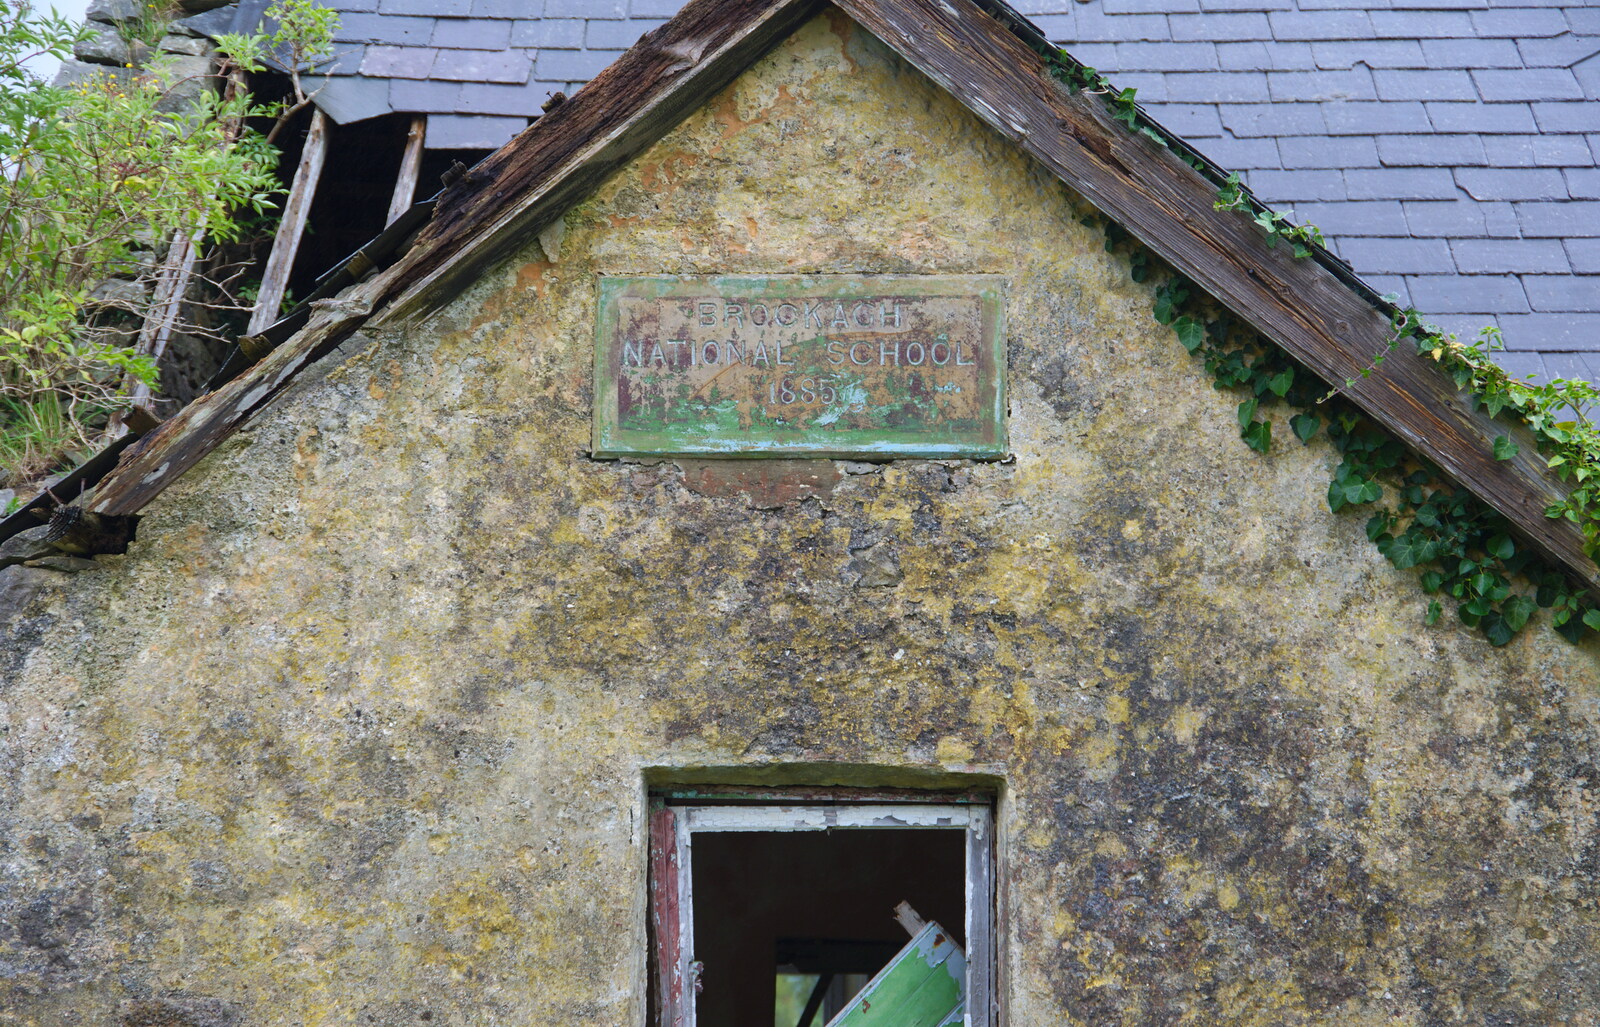 National School plaque, Brockagh 1885 from Travels in the Borderlands: An Blaic/Blacklion to Belcoo and back, Cavan and Fermanagh, Ireland - 22nd August 2019